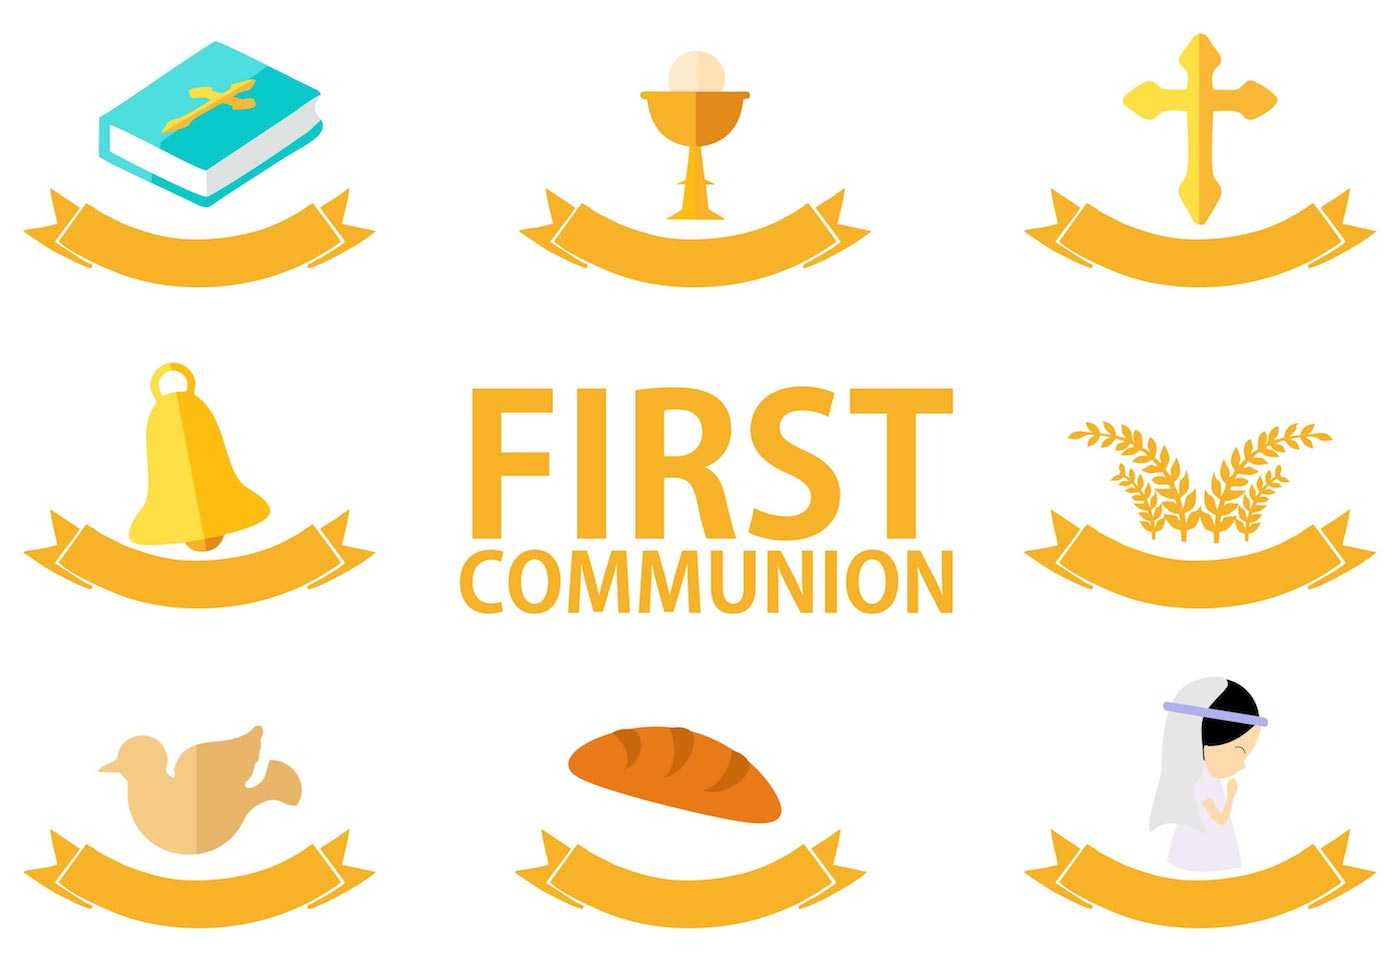 First Communion Template Free Vector Art – (25 Free Downloads) Pertaining To First Holy Communion Banner Templates